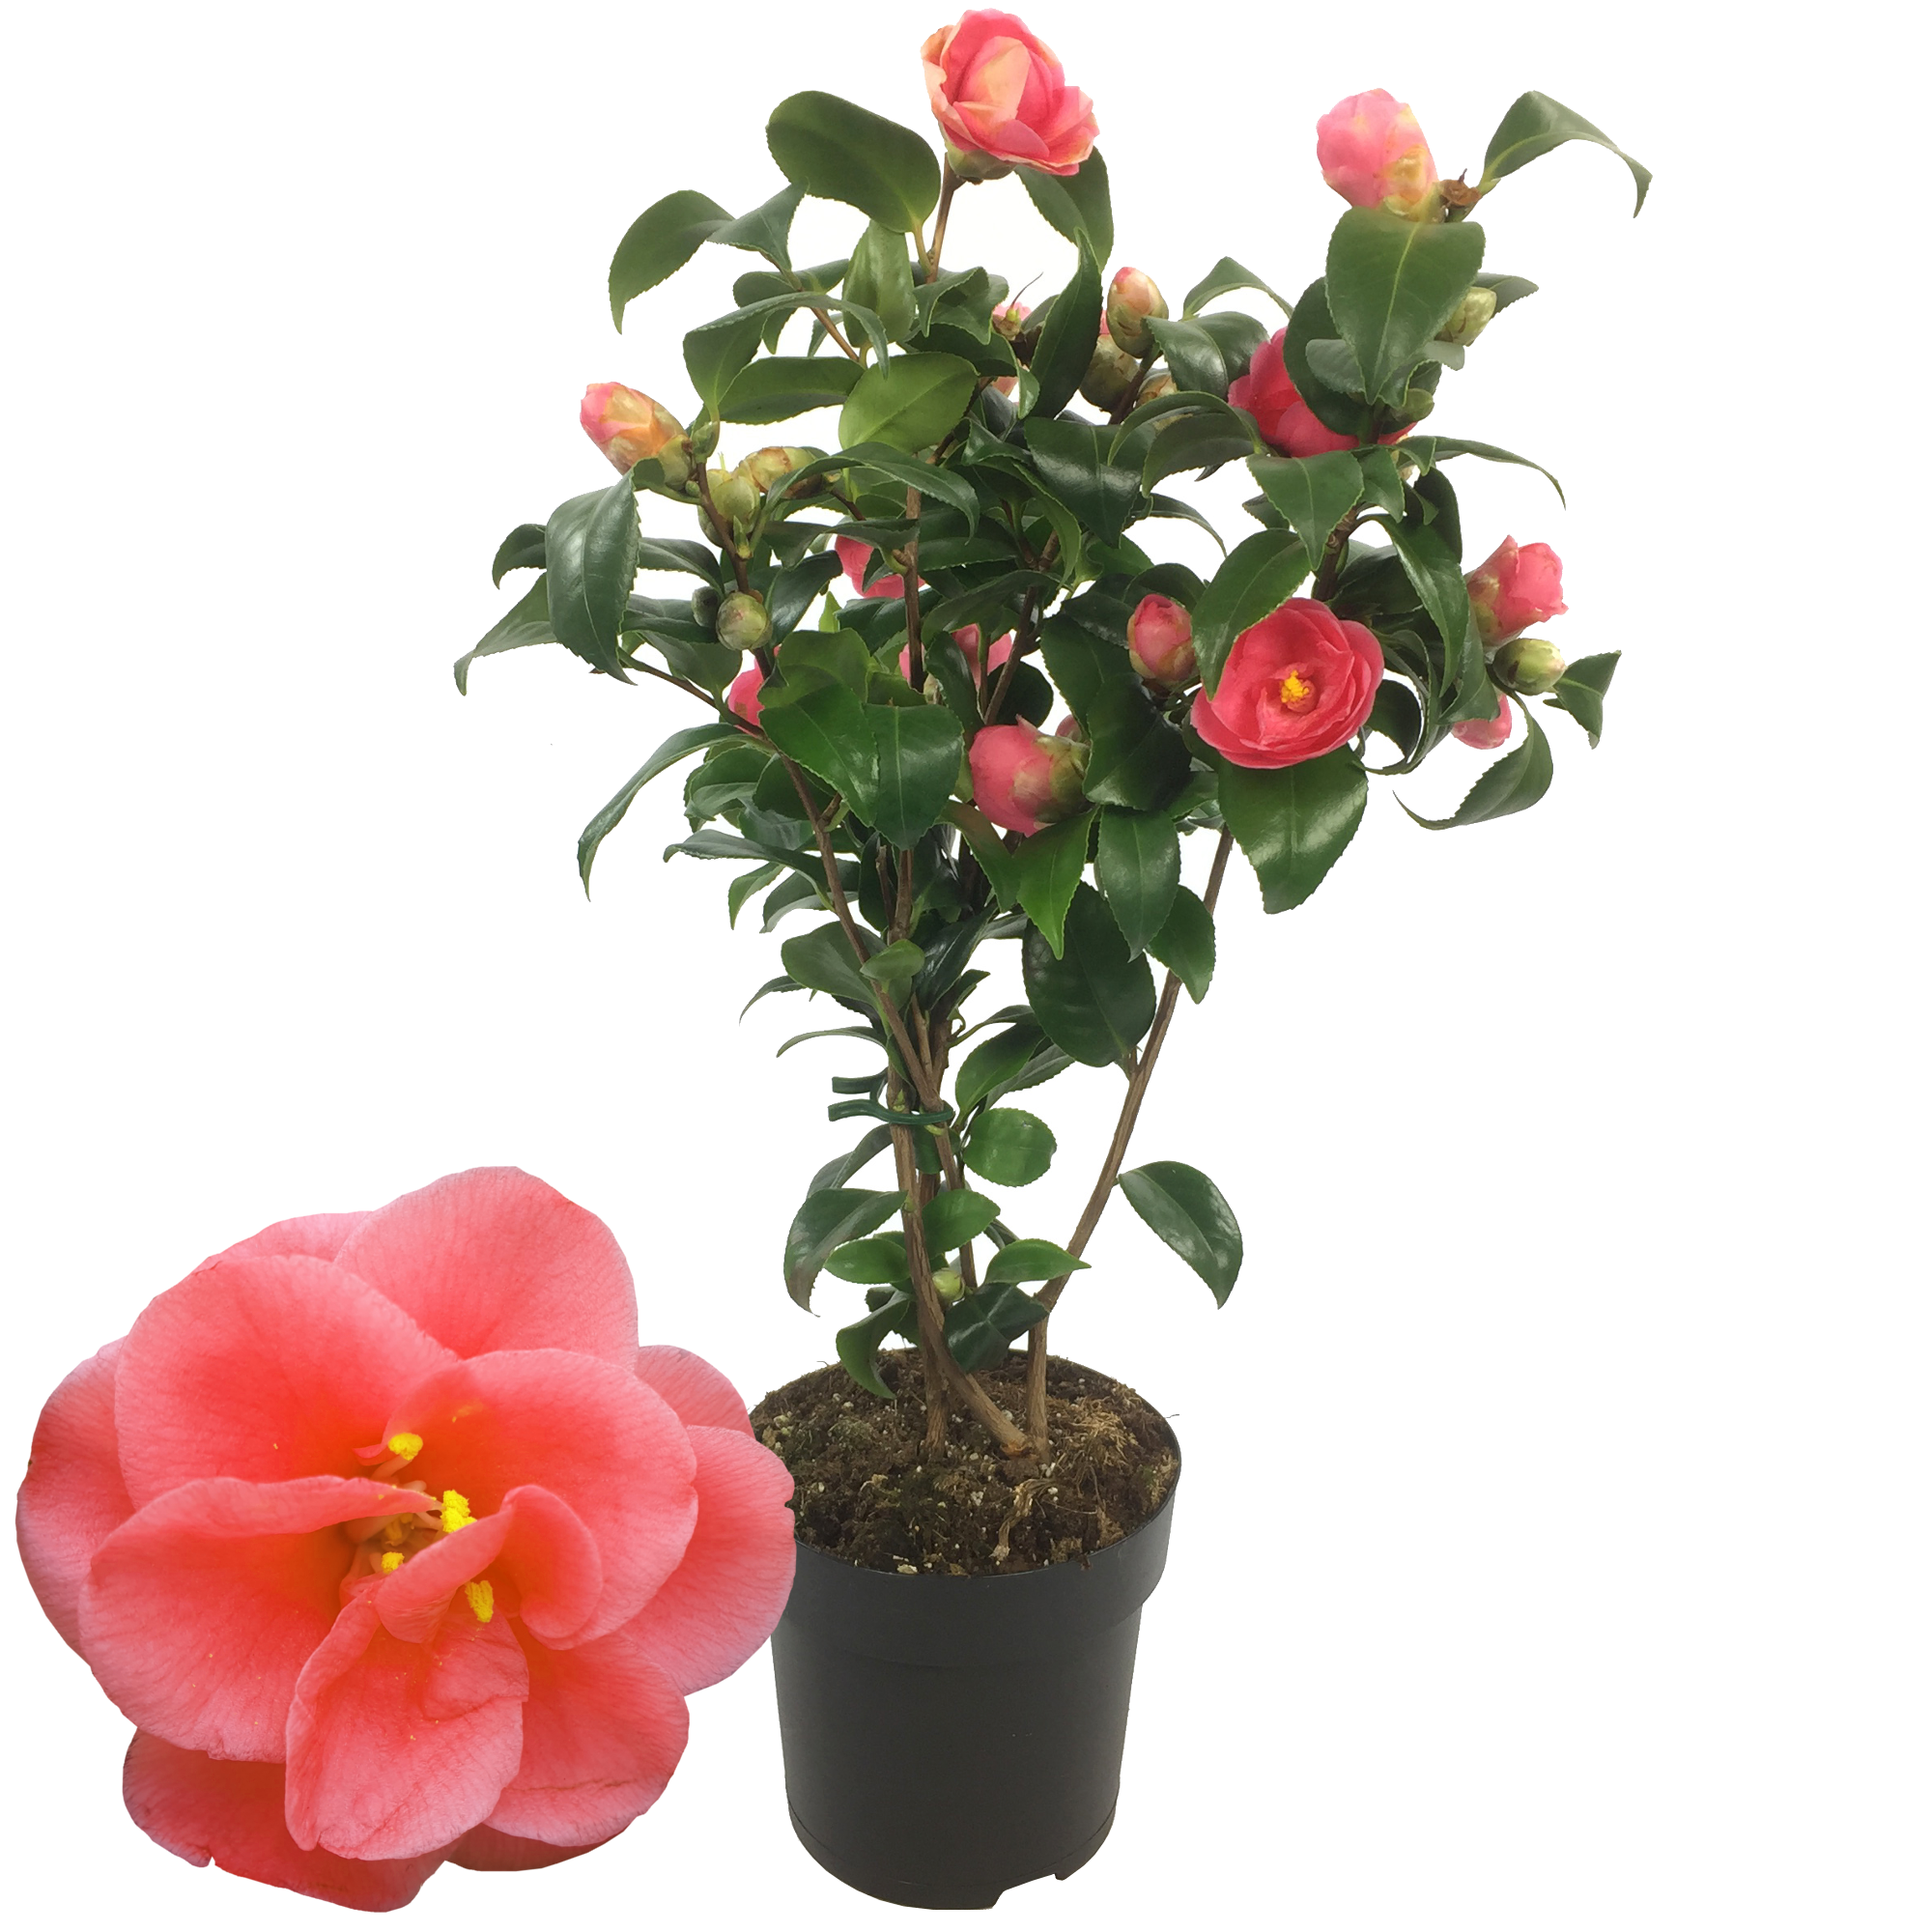 Kamelie 'Mary Williams' rosa 15 cm Topf + product picture